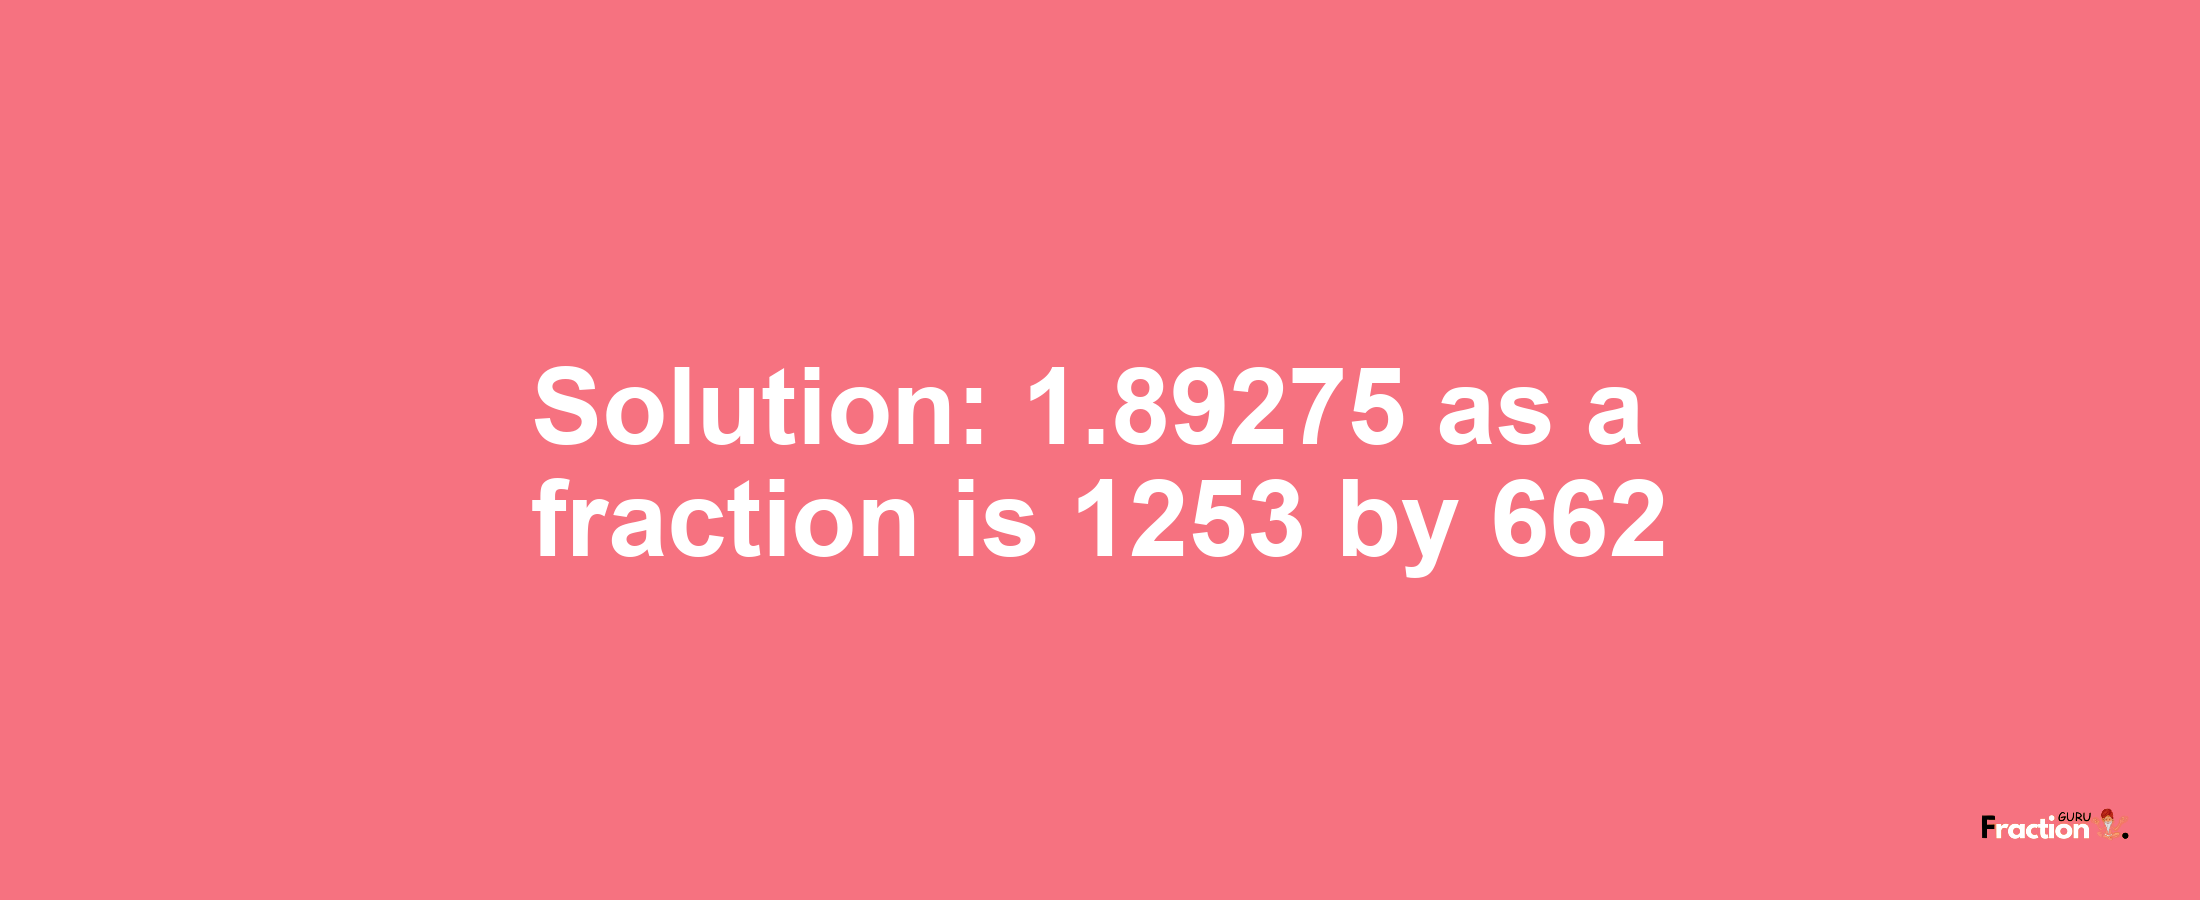 Solution:1.89275 as a fraction is 1253/662